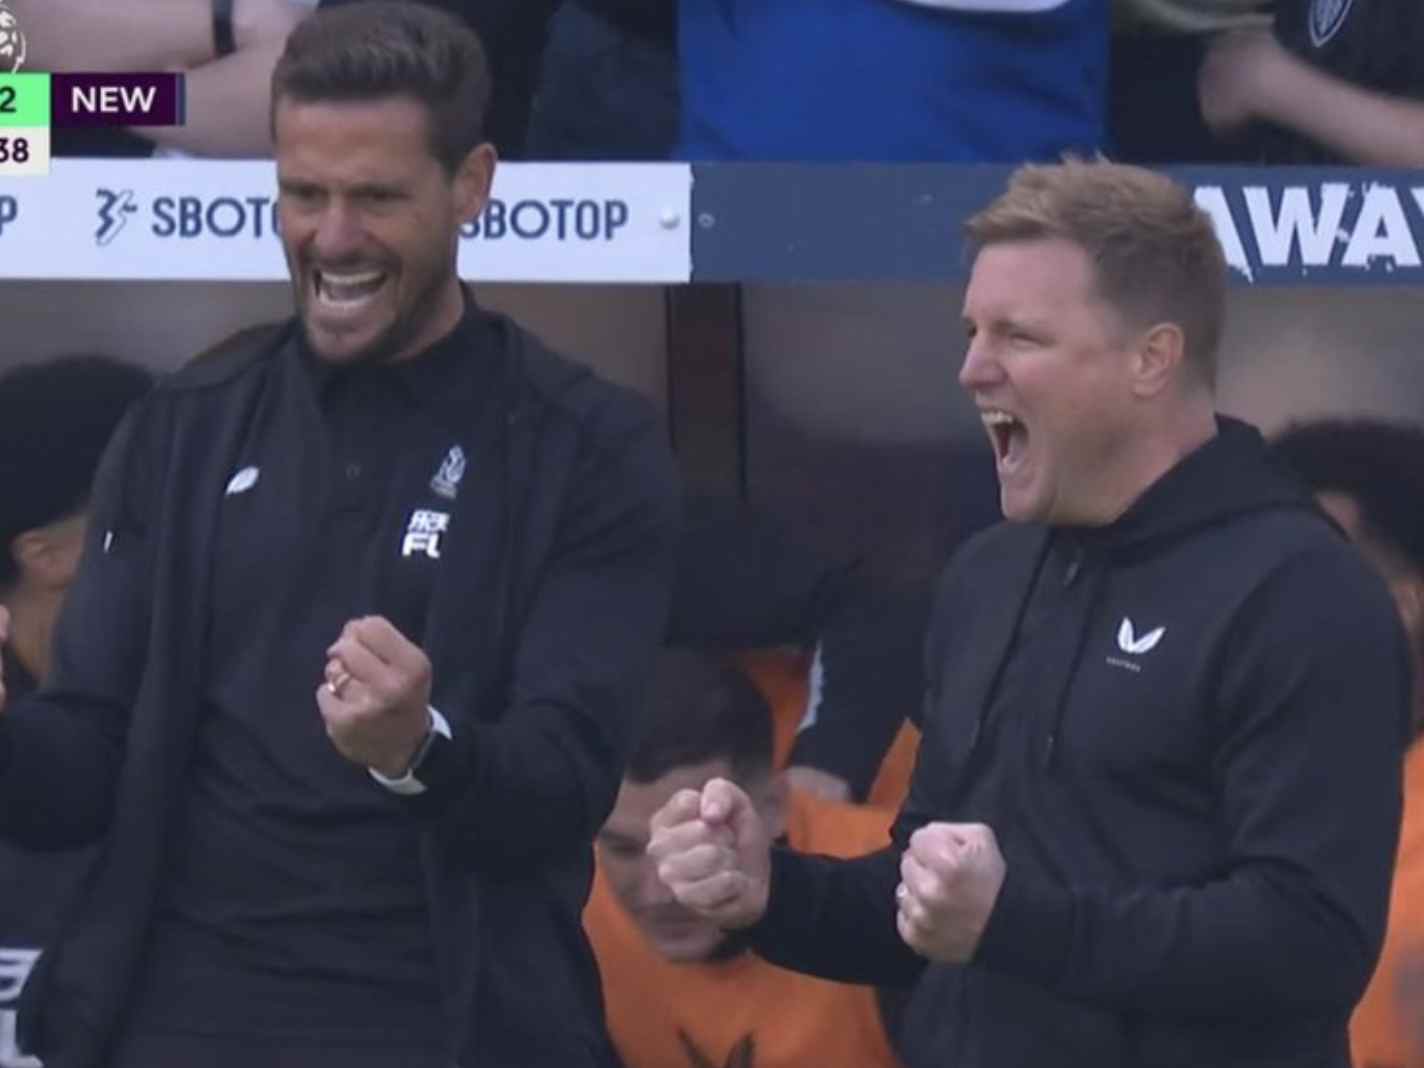 Which Classic Rock Hit is the New Eddie Howe & Jason Tindall Chant Inspired By?